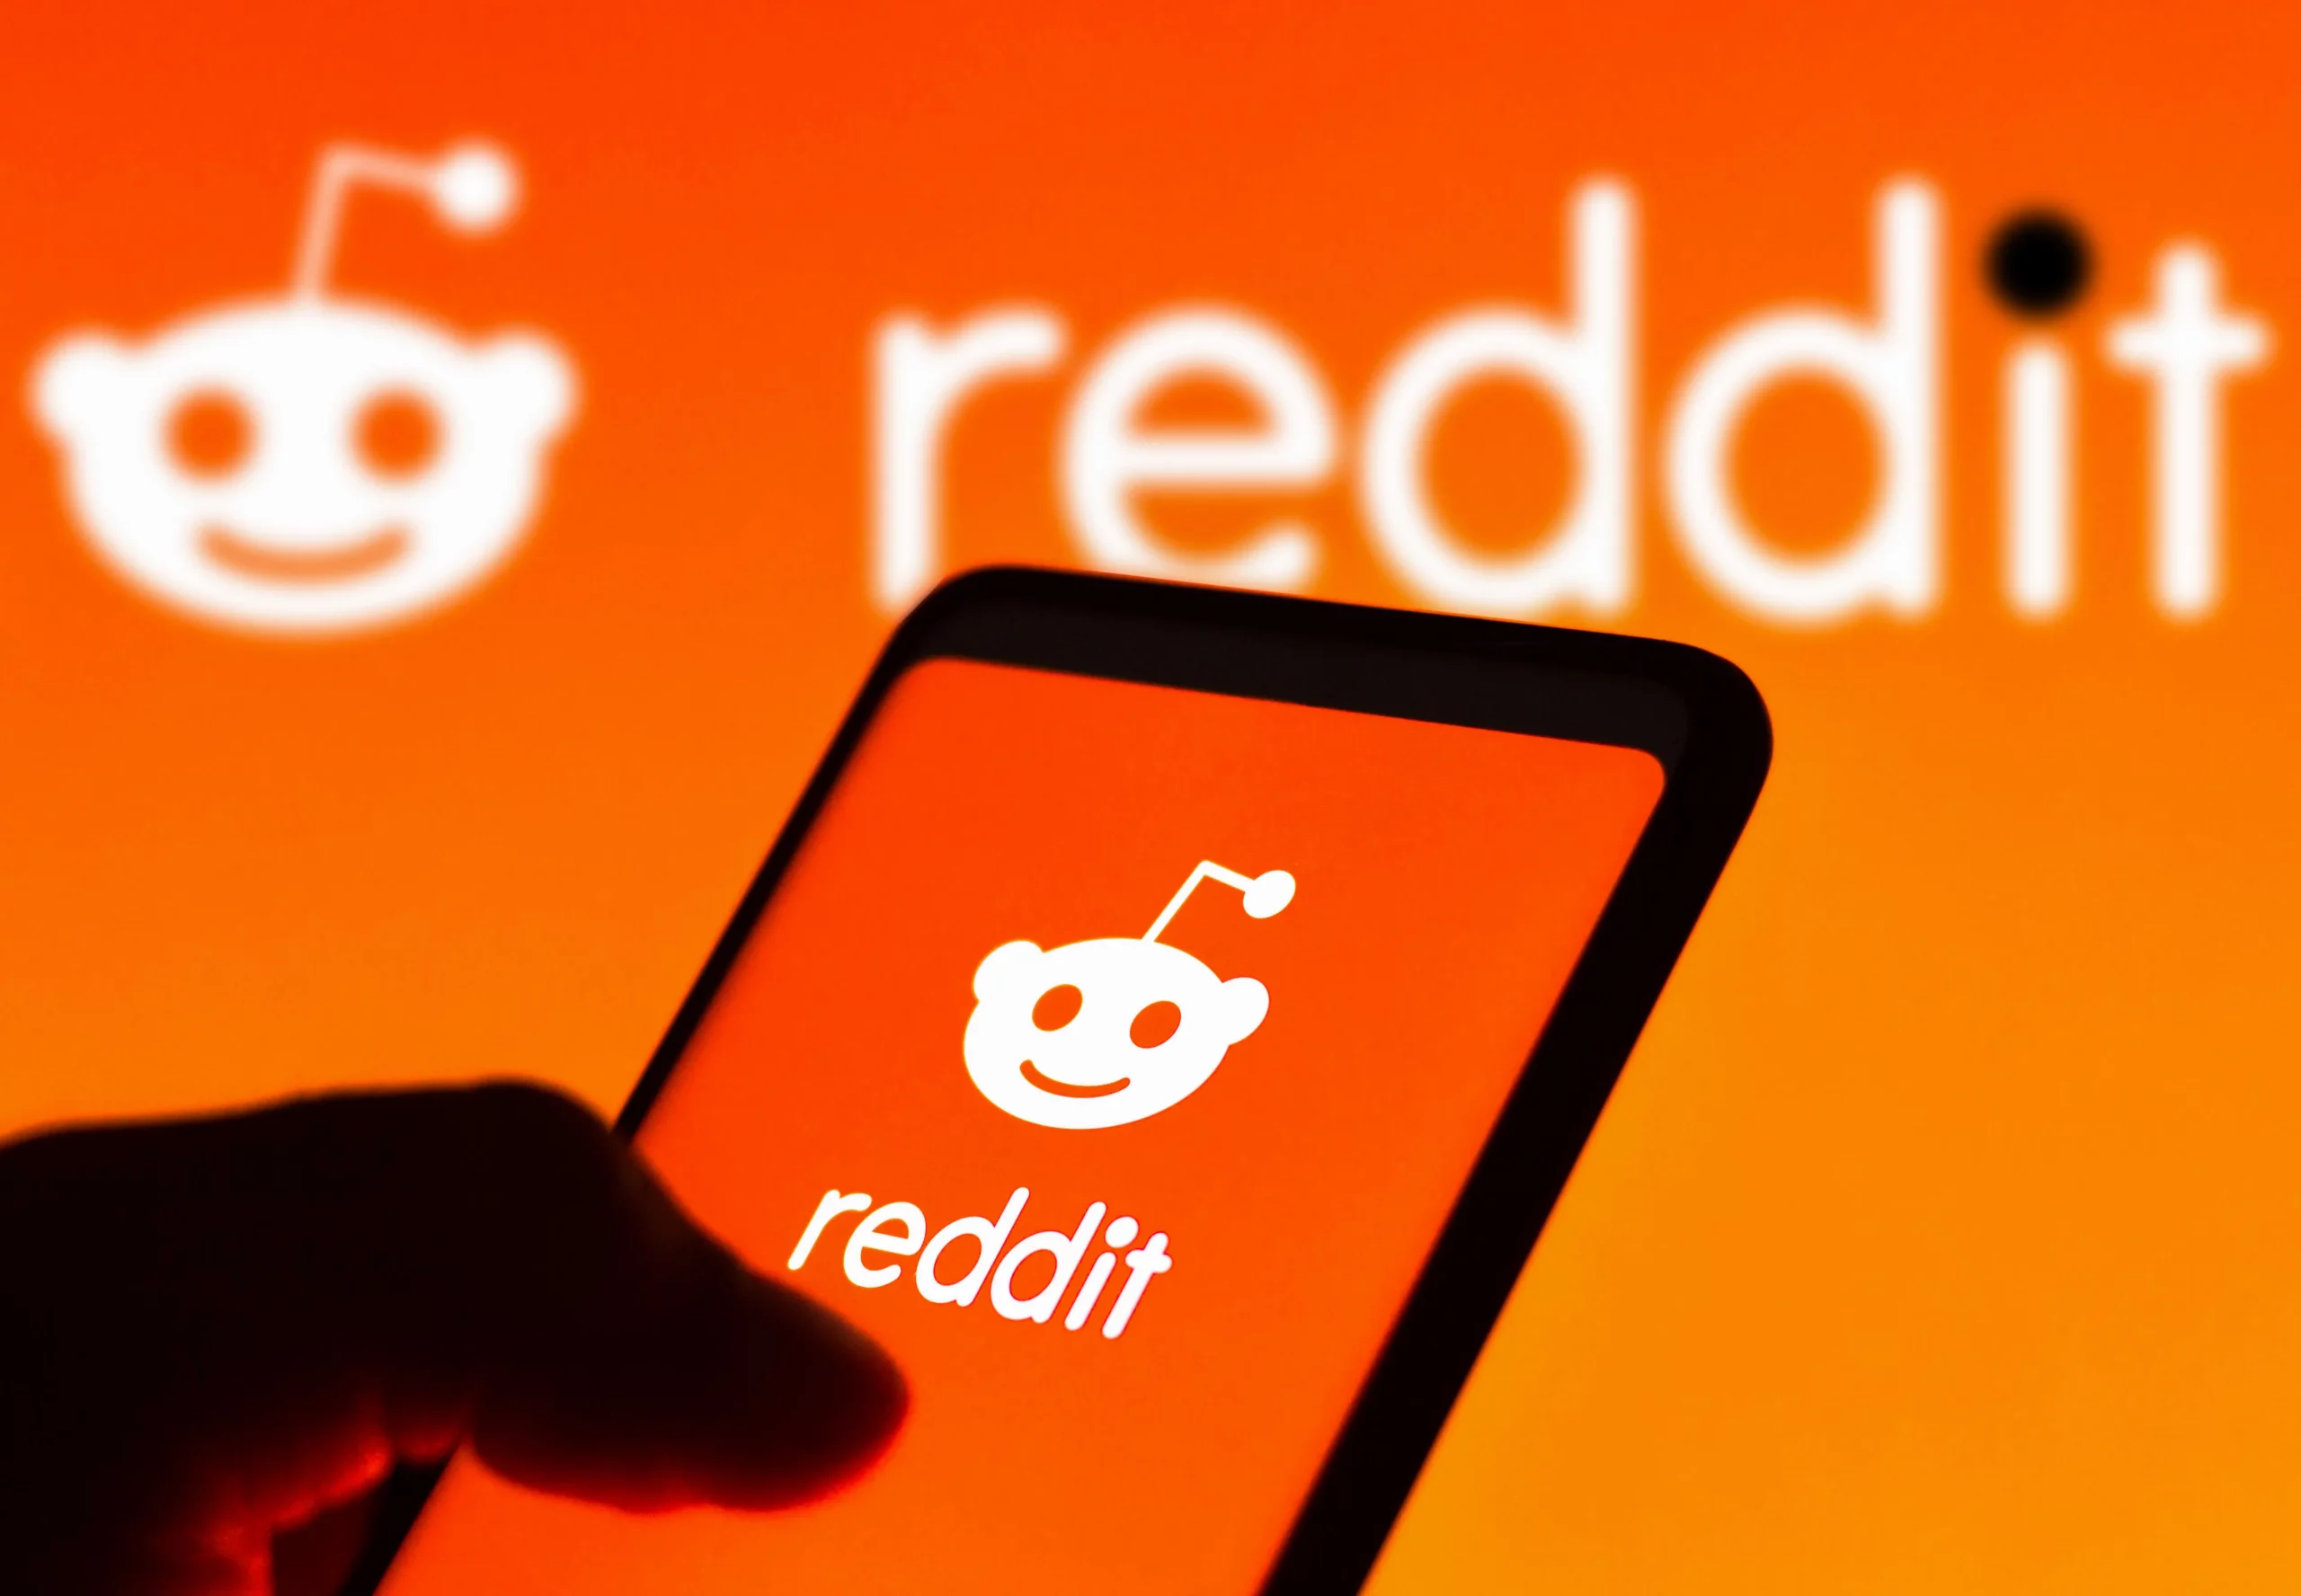 Reddit Content Licensing Deal Revealed to Train AI Models